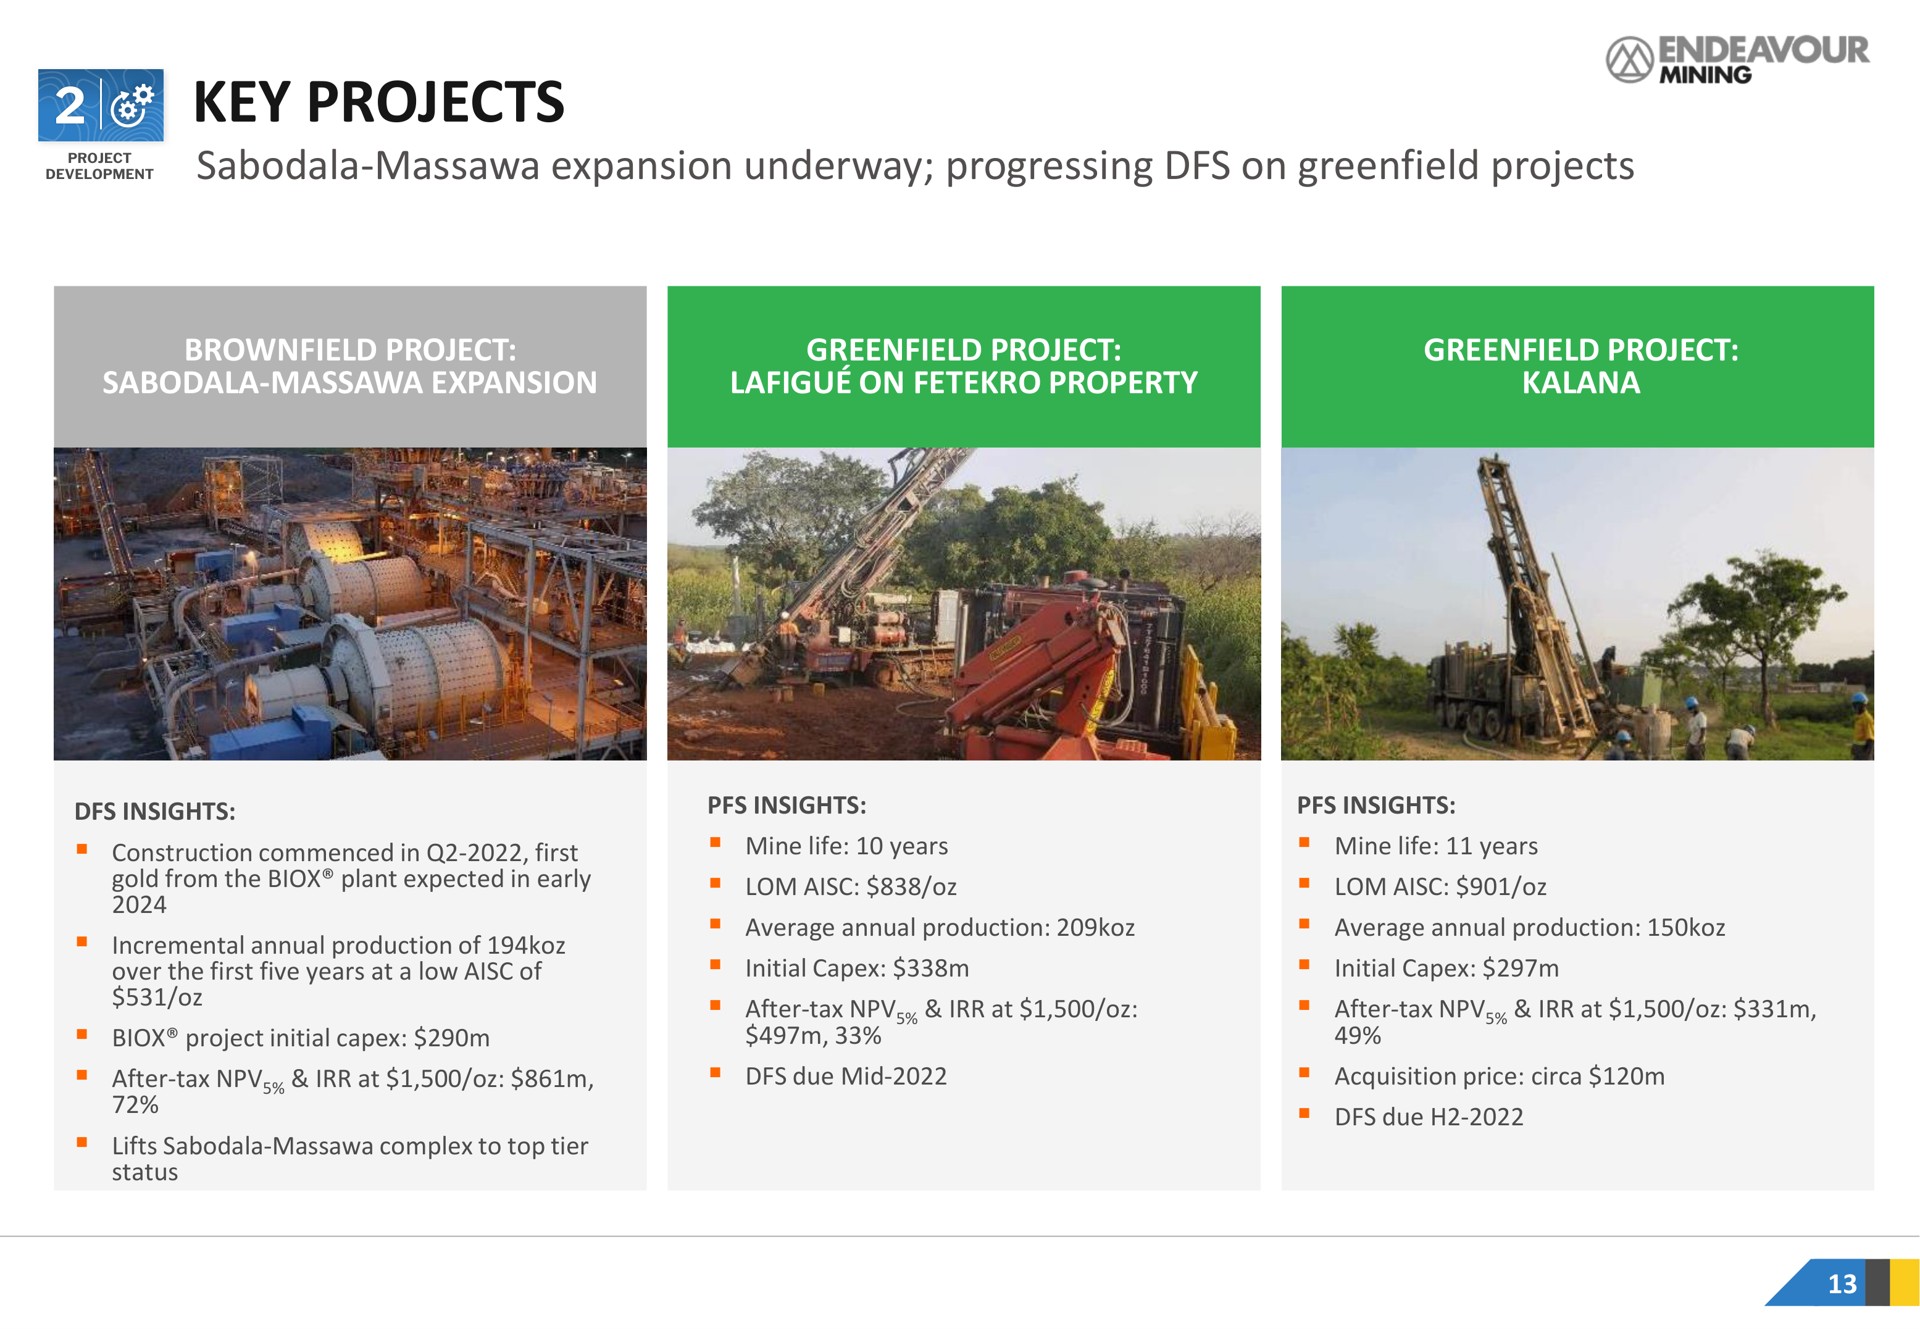 key projects expansion underway progressing on projects due | Endeavour Mining